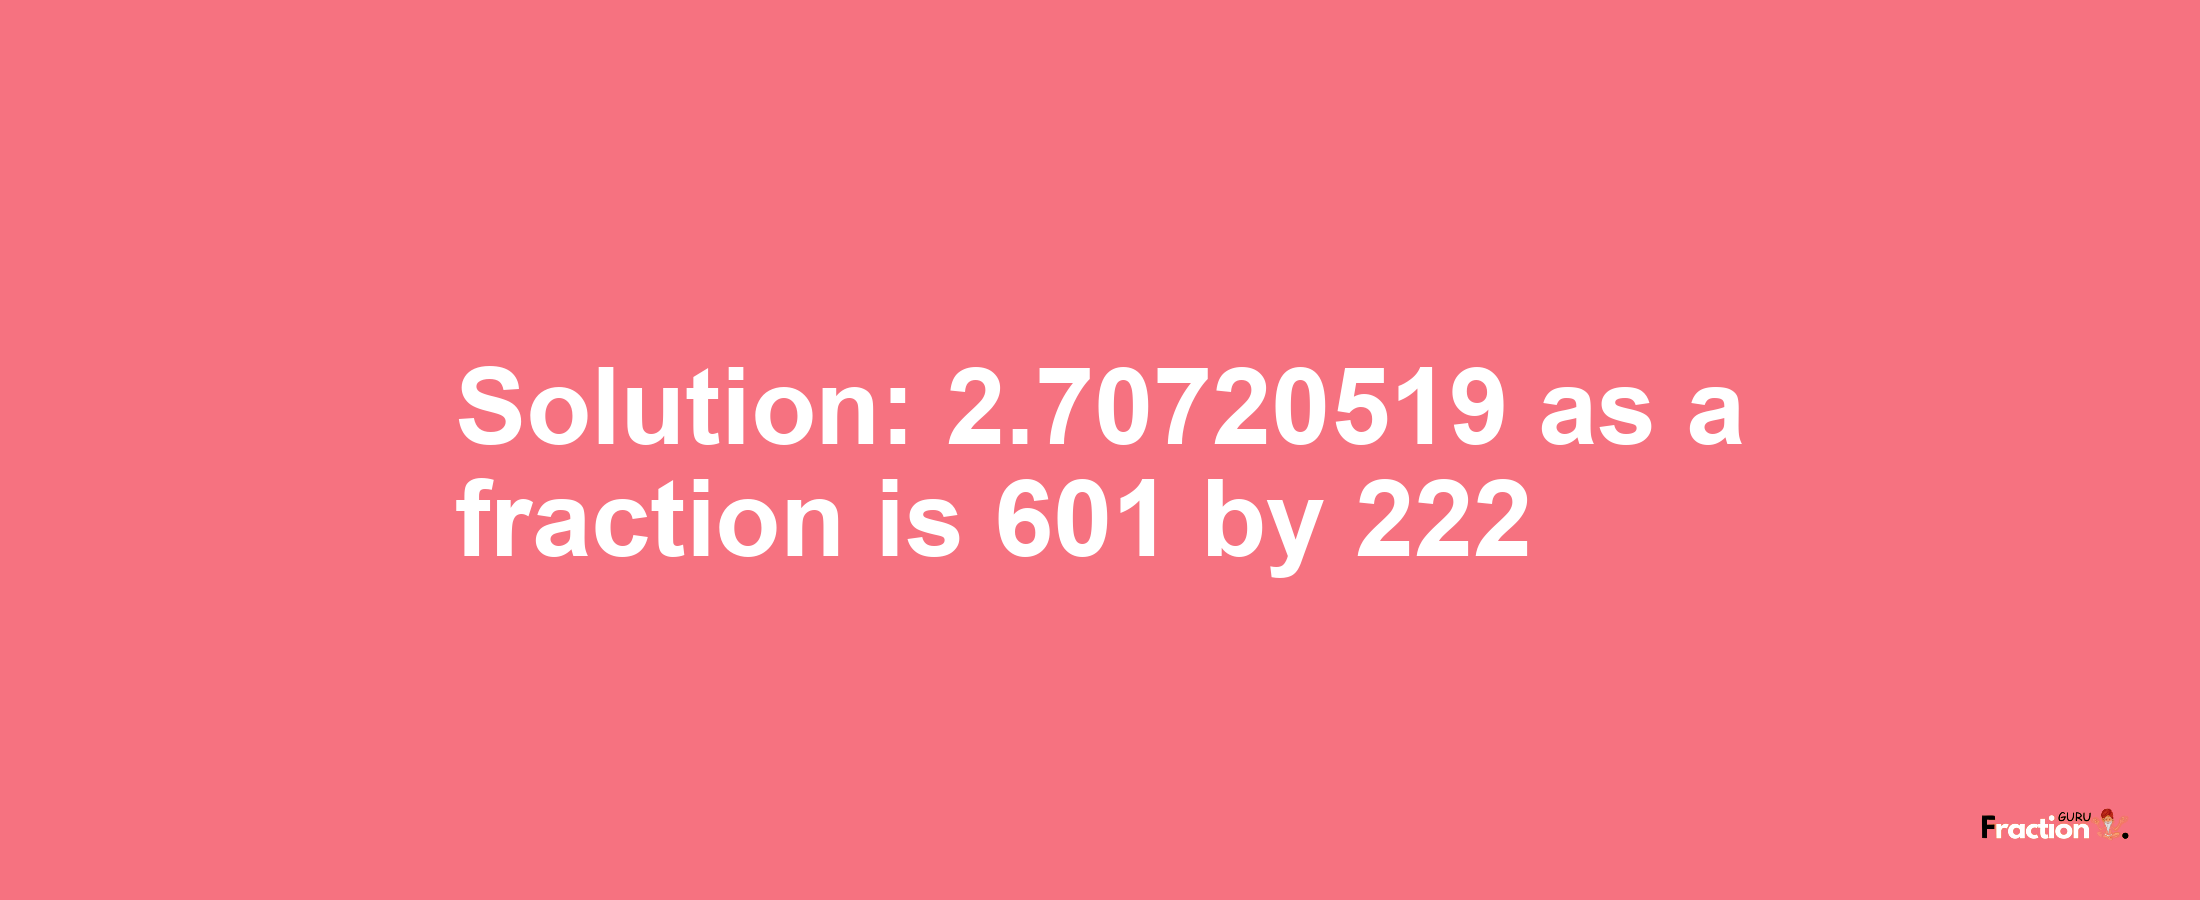 Solution:2.70720519 as a fraction is 601/222